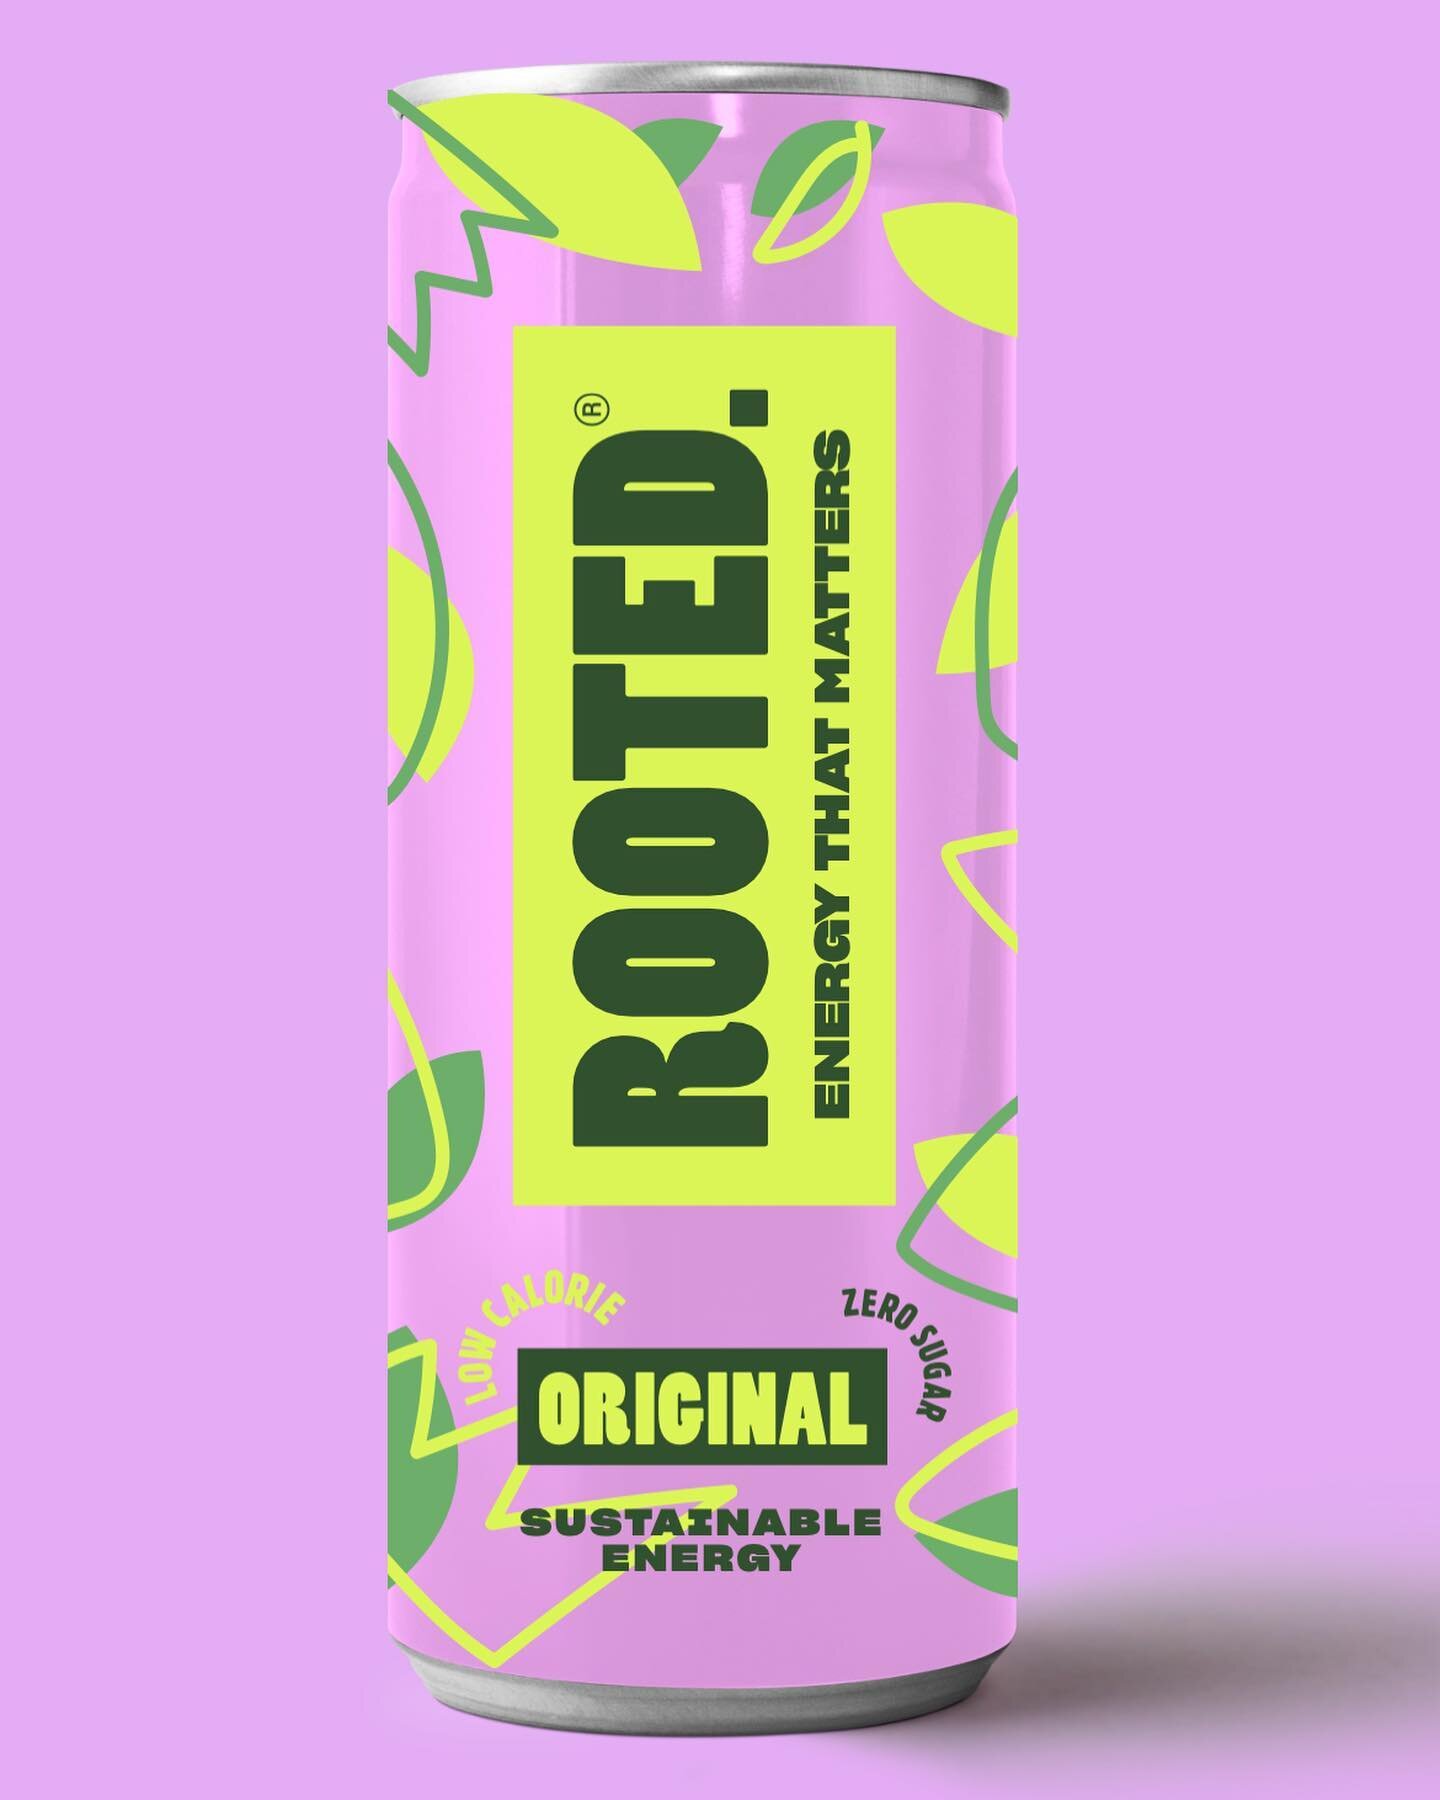 Freelance graphic designer, specialising in branding/packaging design. Here&rsquo;s a recent branding/packaging design project for @rooteddrinks For project enquires get in touch via DM/Email!
-
#brandingdesign #graphicdesigner #energydrink #logo #lo